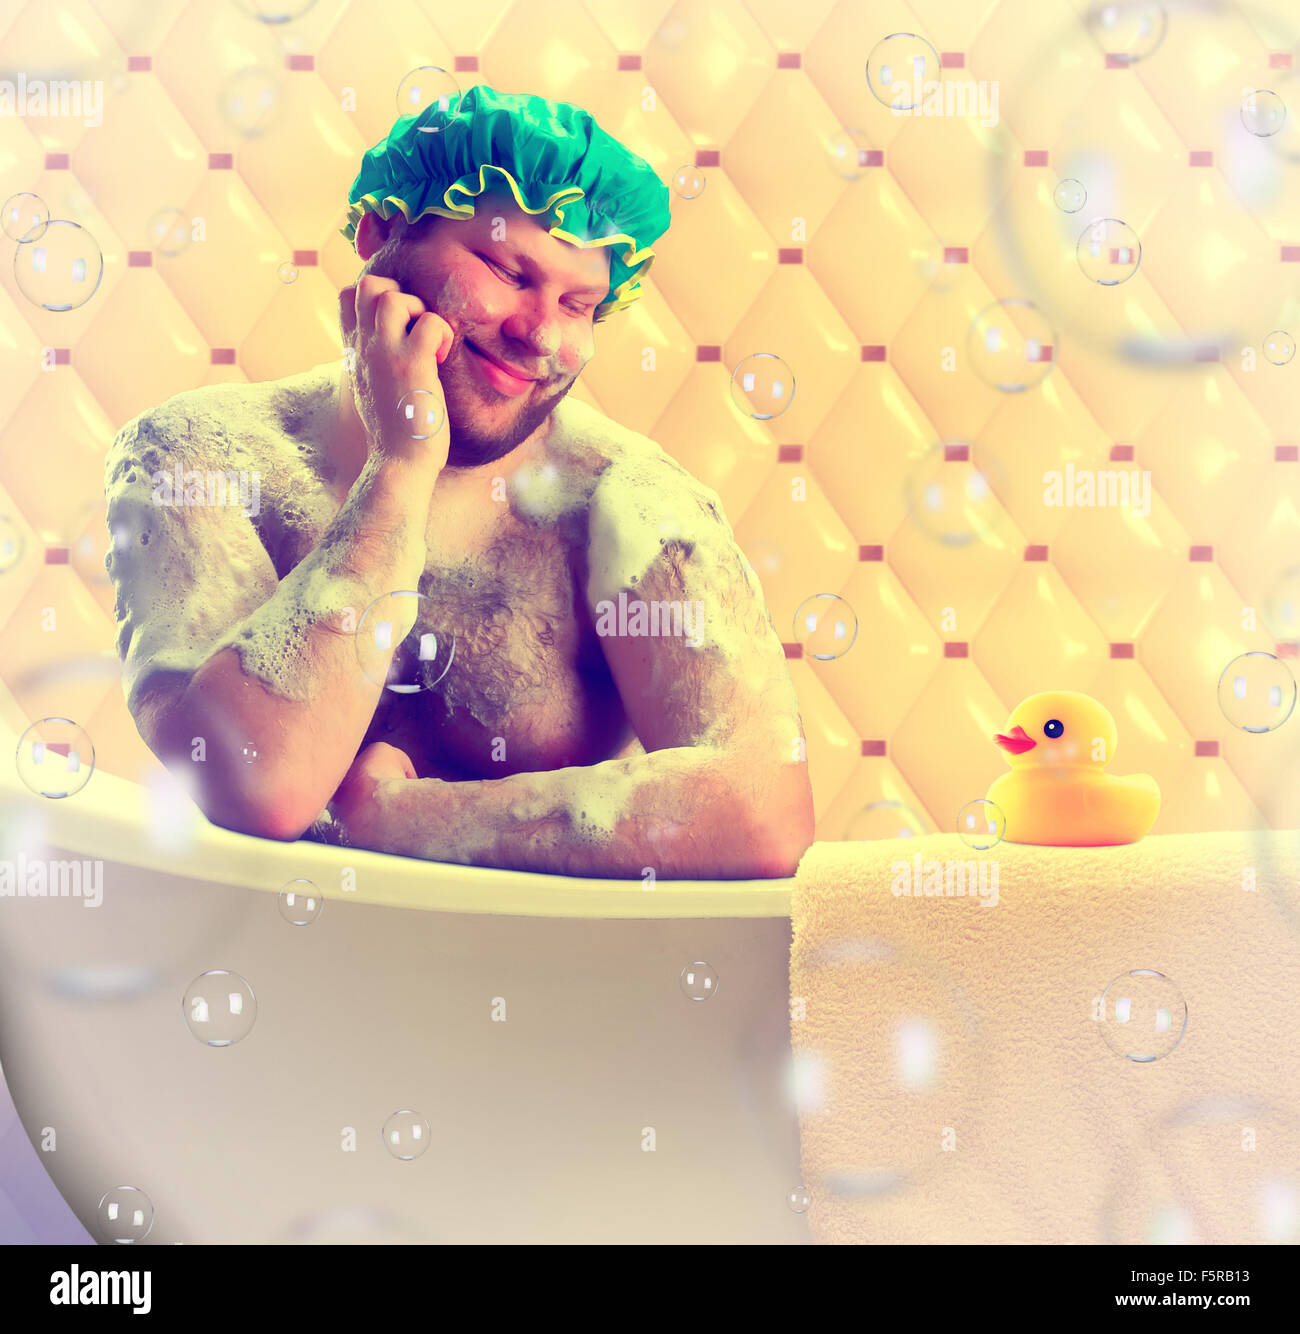 Romantic dreamer taking bath with toy duck Stock Photo